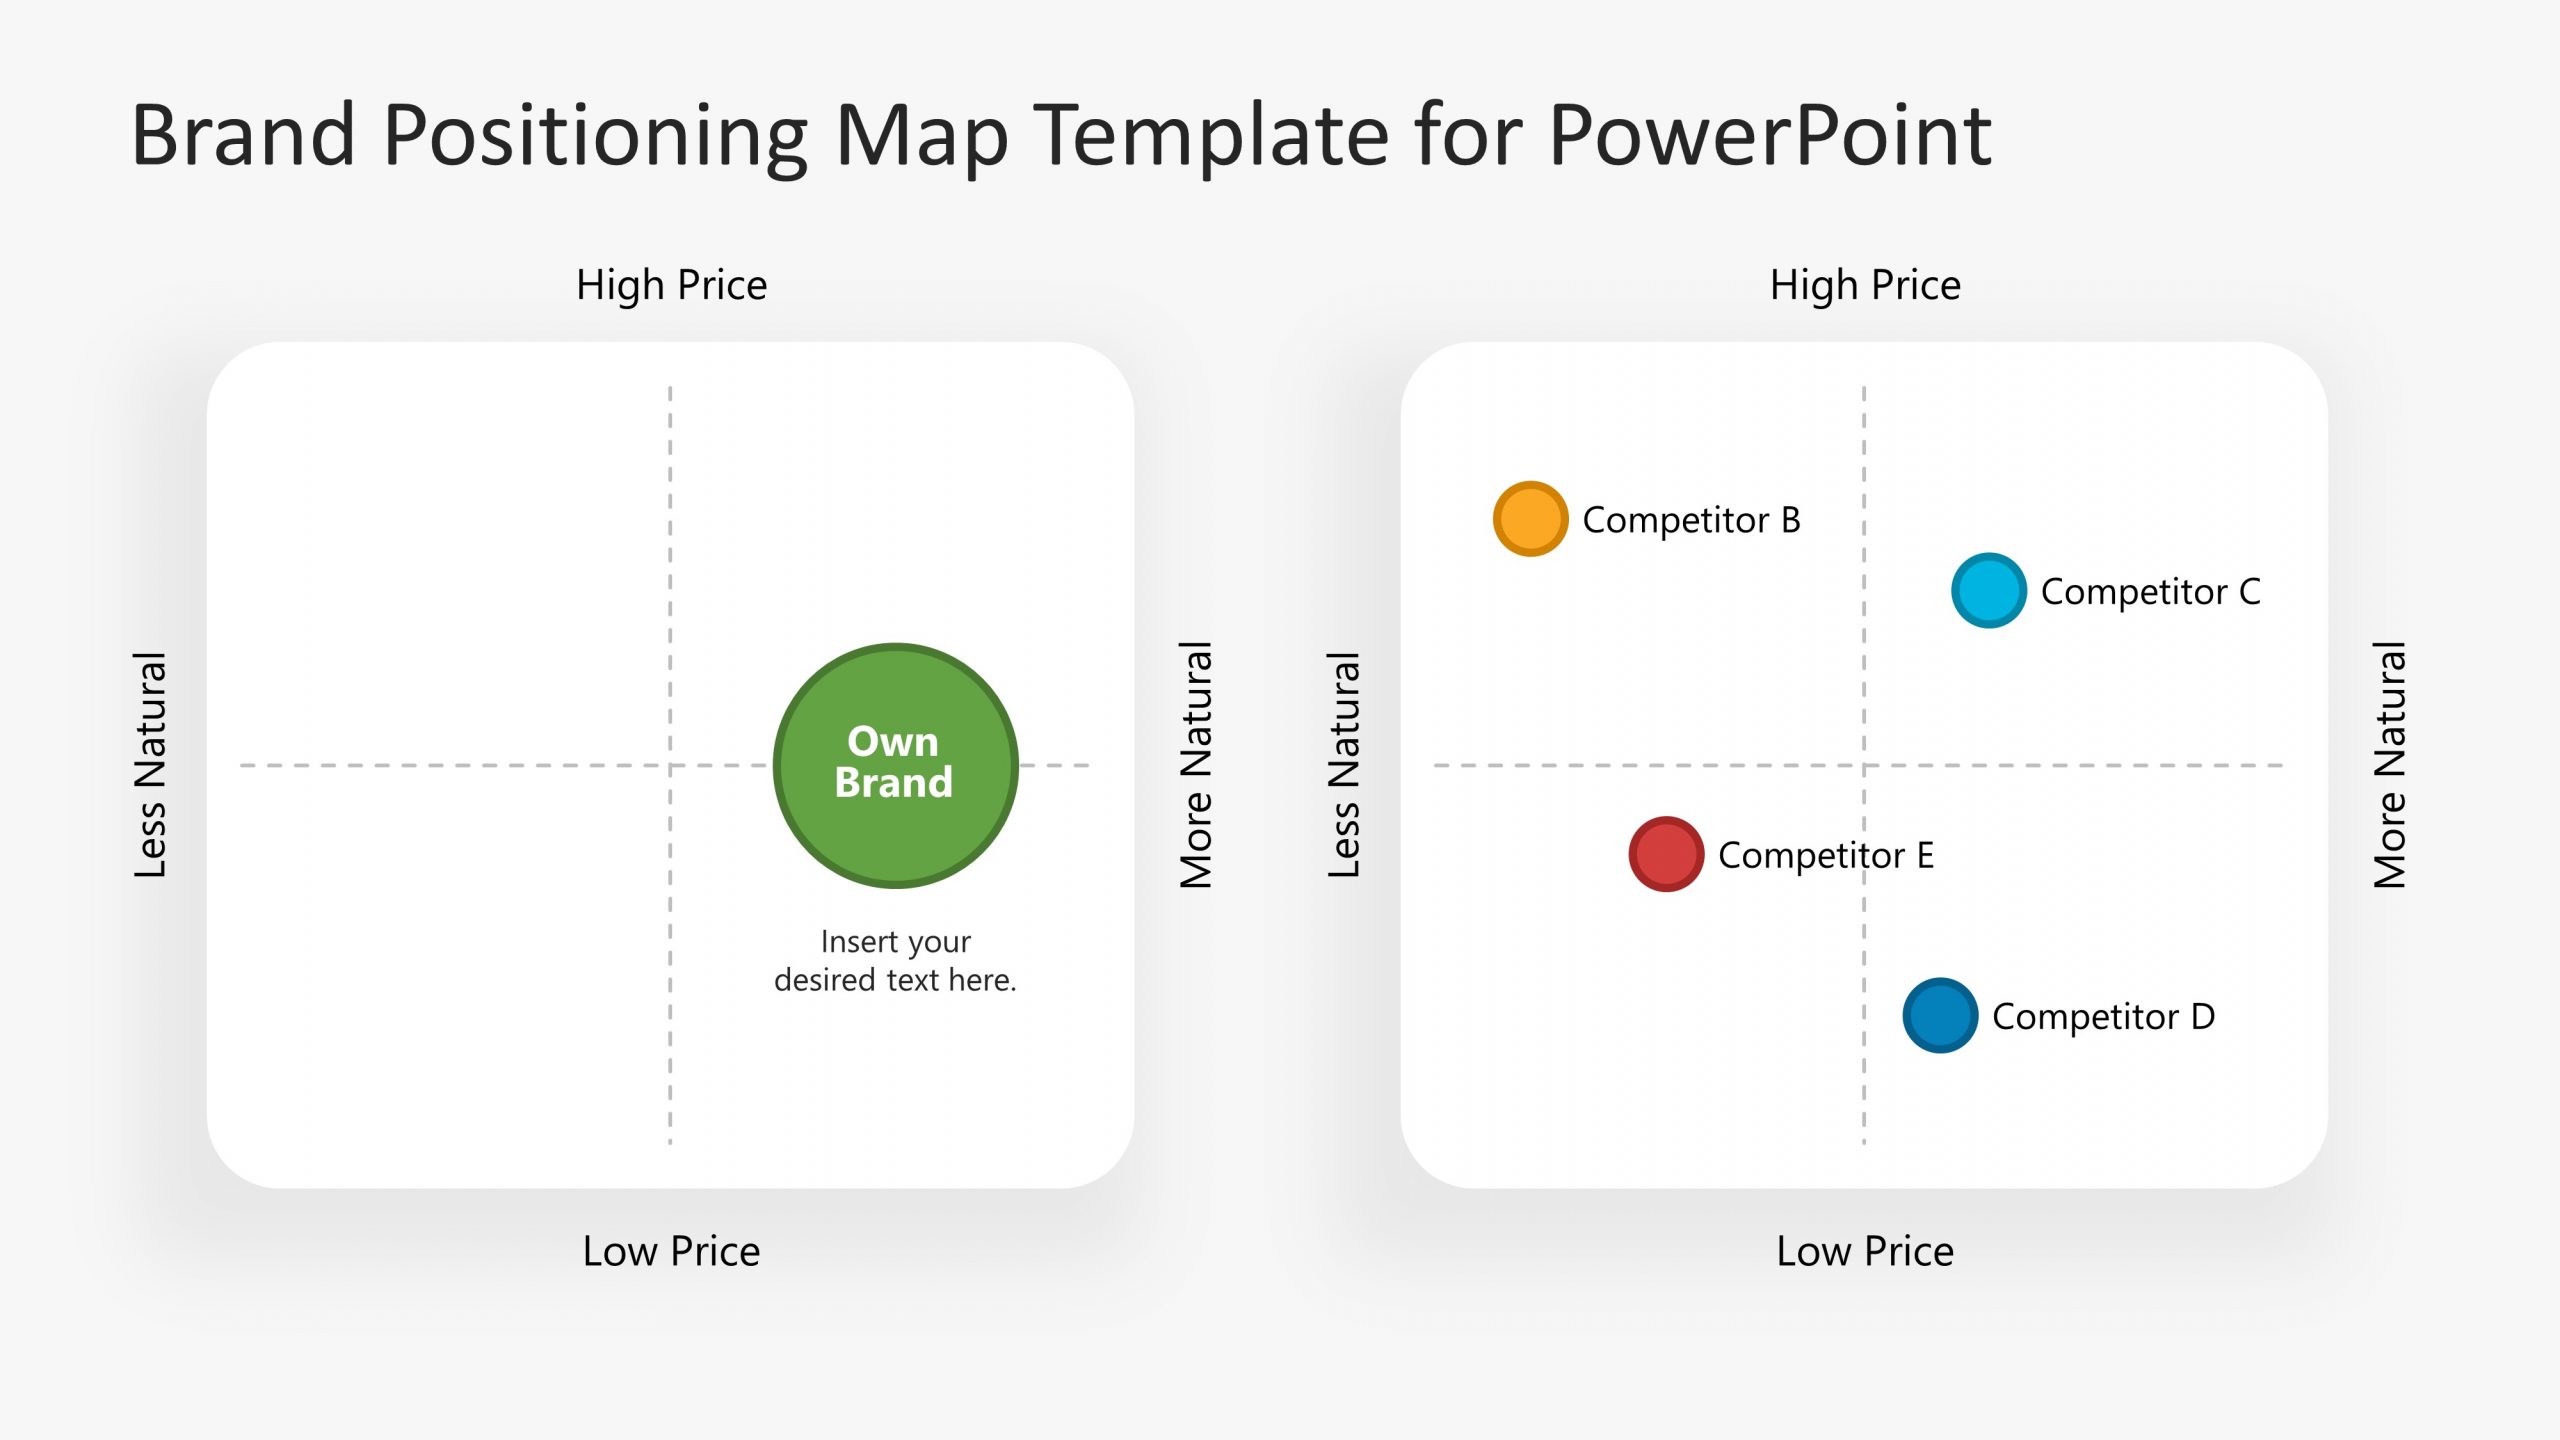 Brand Positioning Map Template